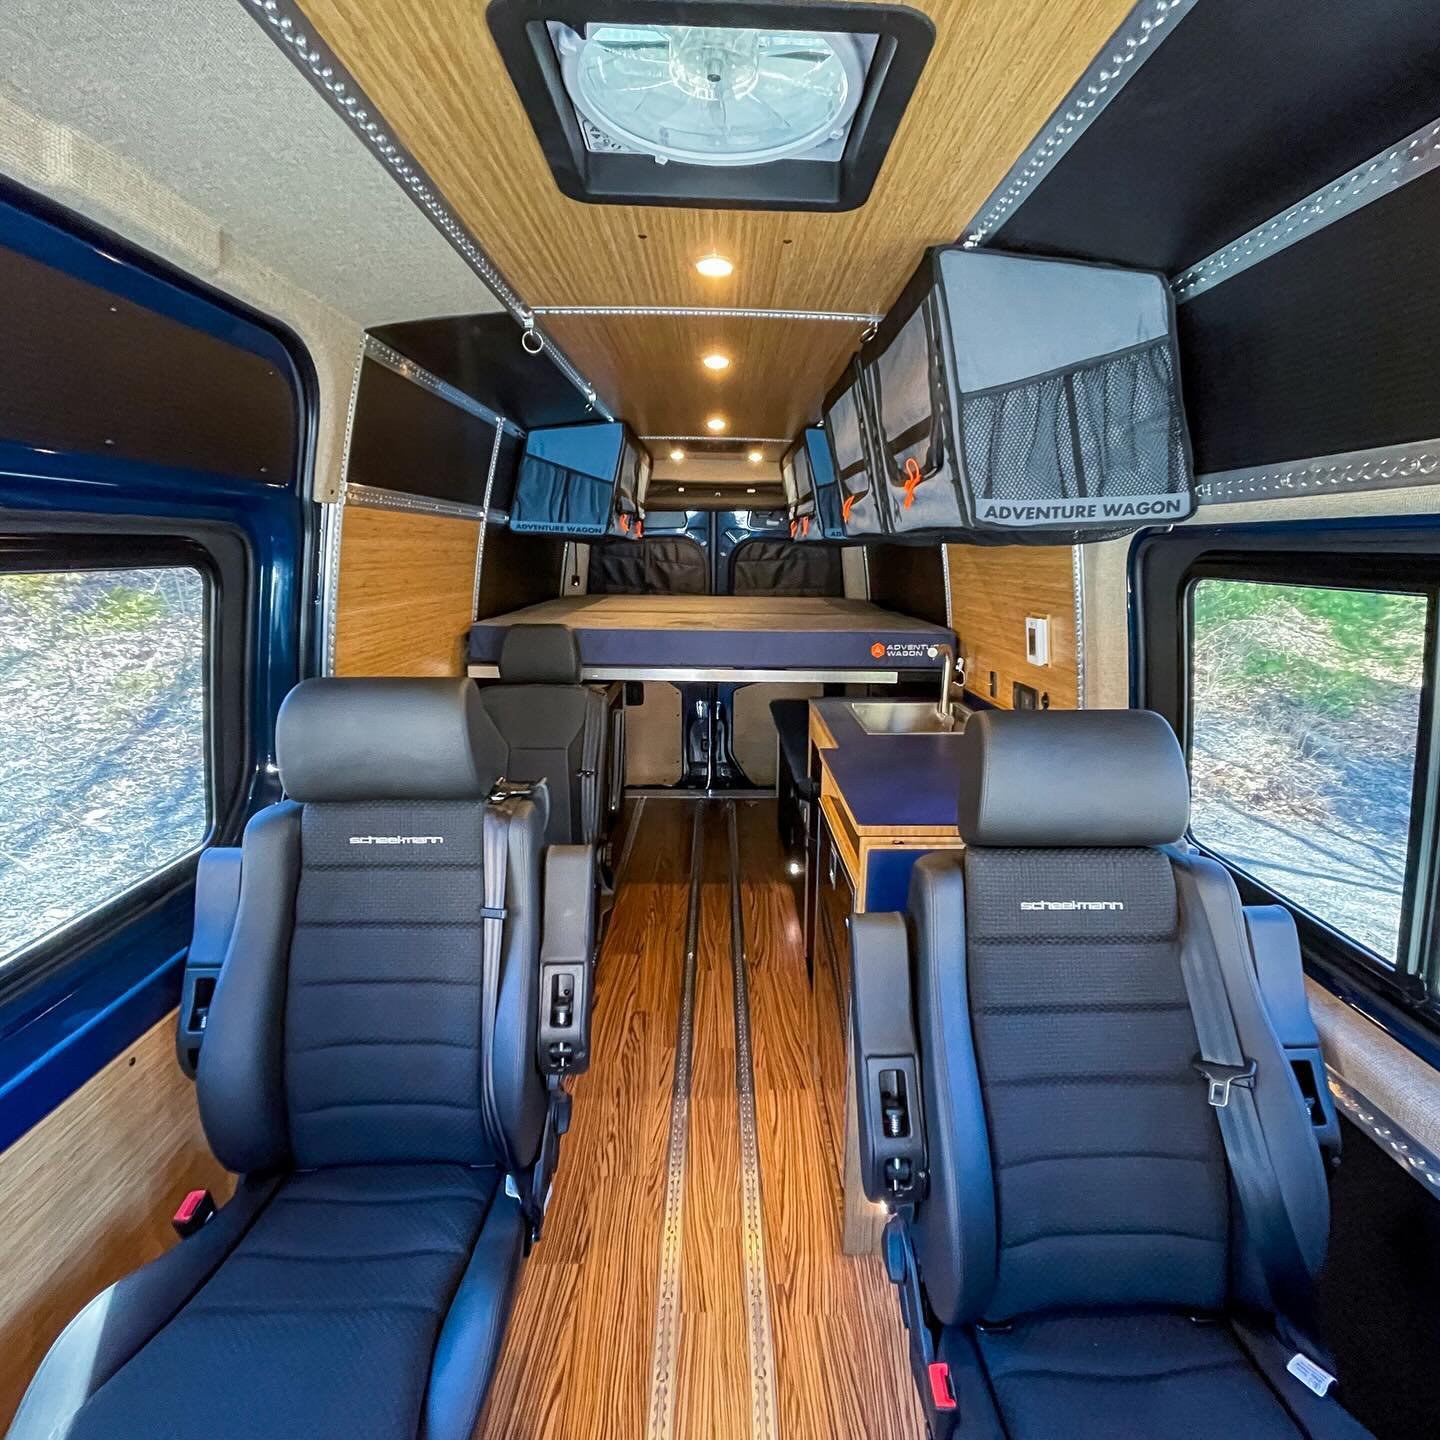 Van Delivery Week! Tuesday Nirvana Upfitters delivered this blue beauty to its owners and sent it out into the wild! 
&ldquo;Get There&rdquo; was designed for versatility &amp; function for the ultimate adventures across the seasons 🚐
A few highligh